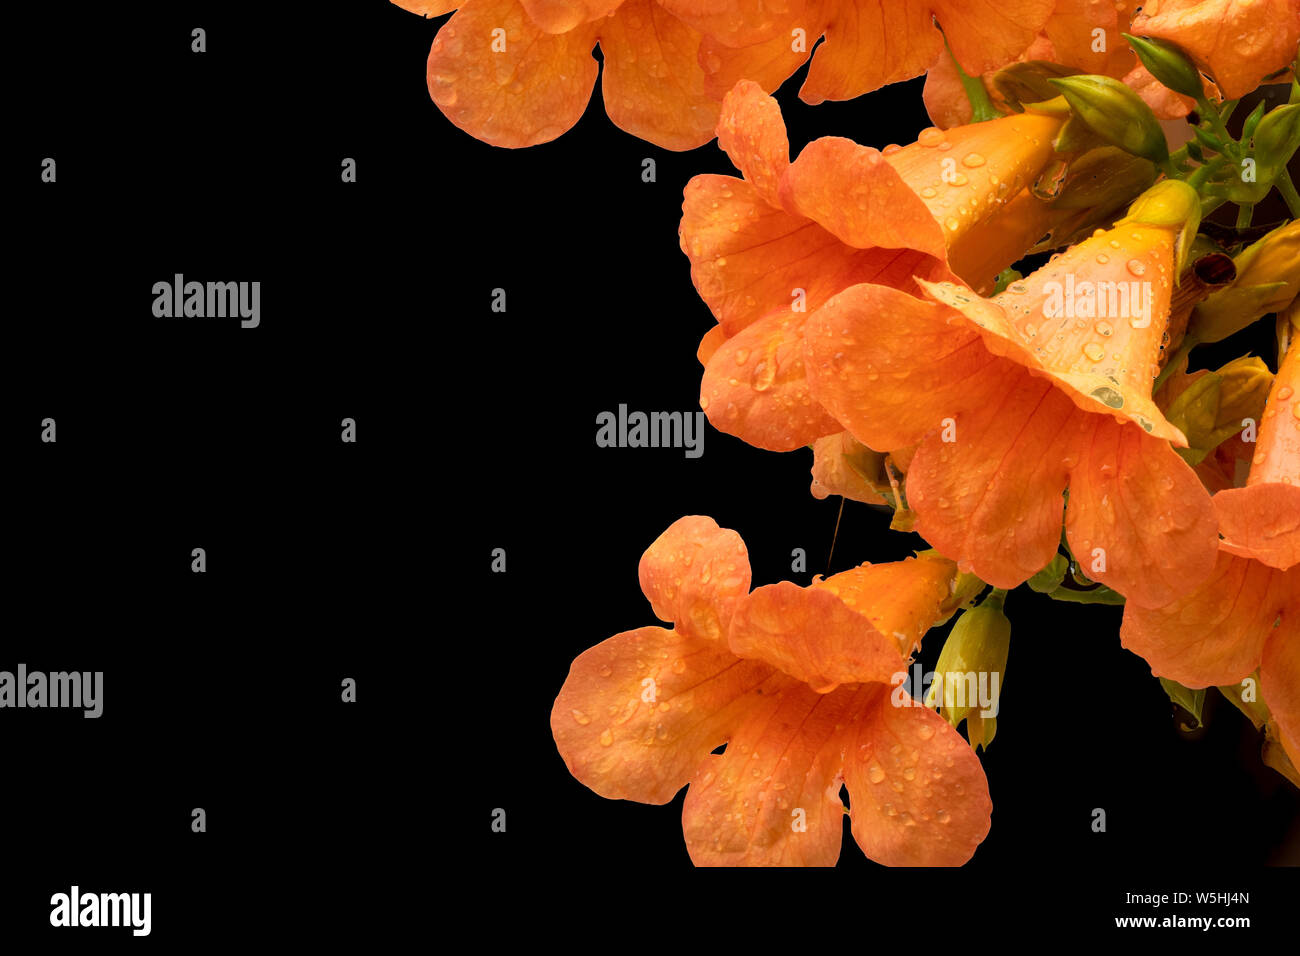 Beautiful Flower of Chinese Trumpet Vine, Isolated on Black background. Stock Photo